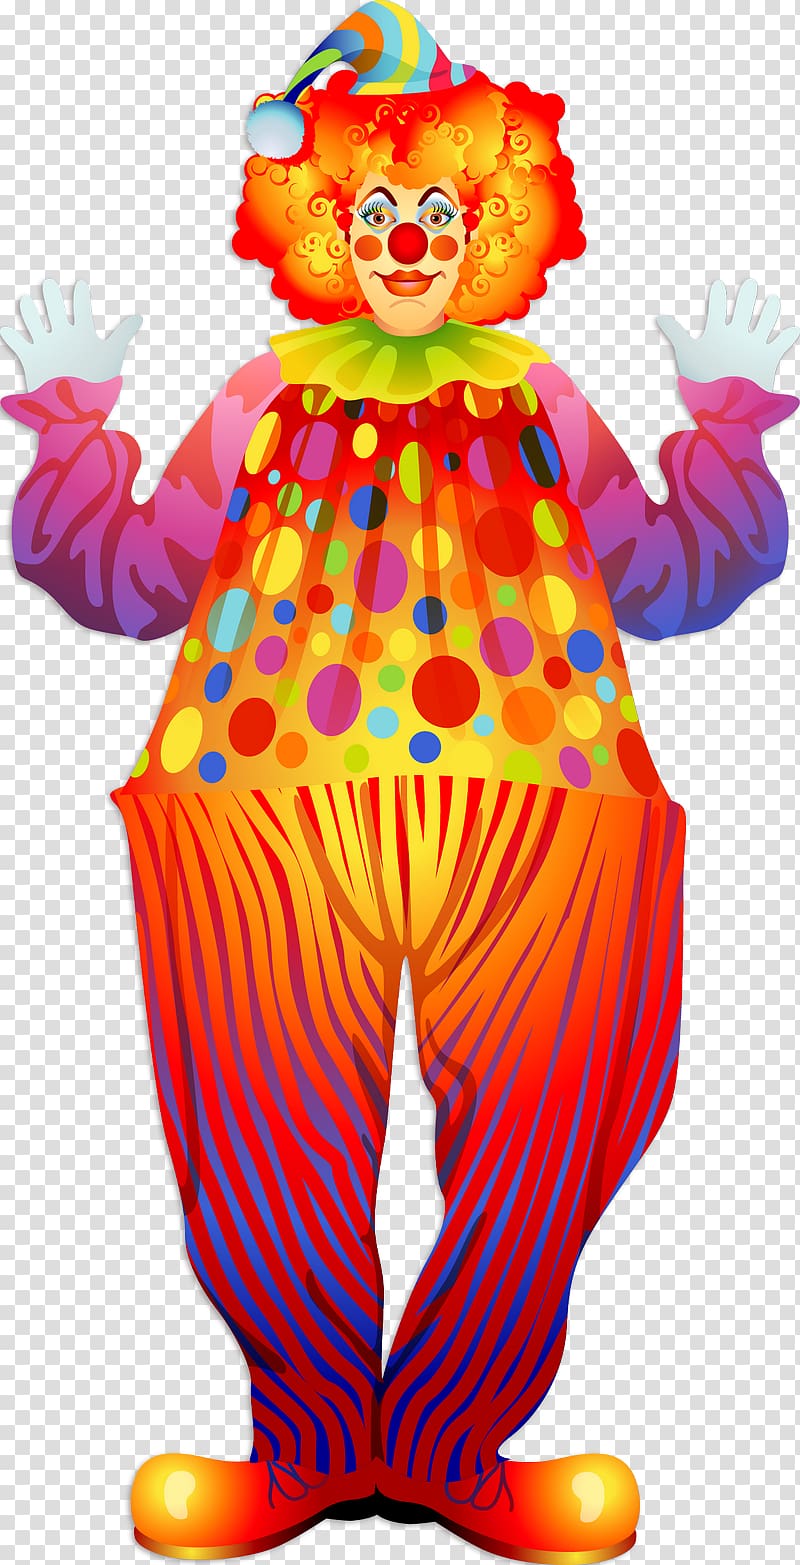 Clown Pierrot Performance Circus, circus tent transparent background PNG clipart